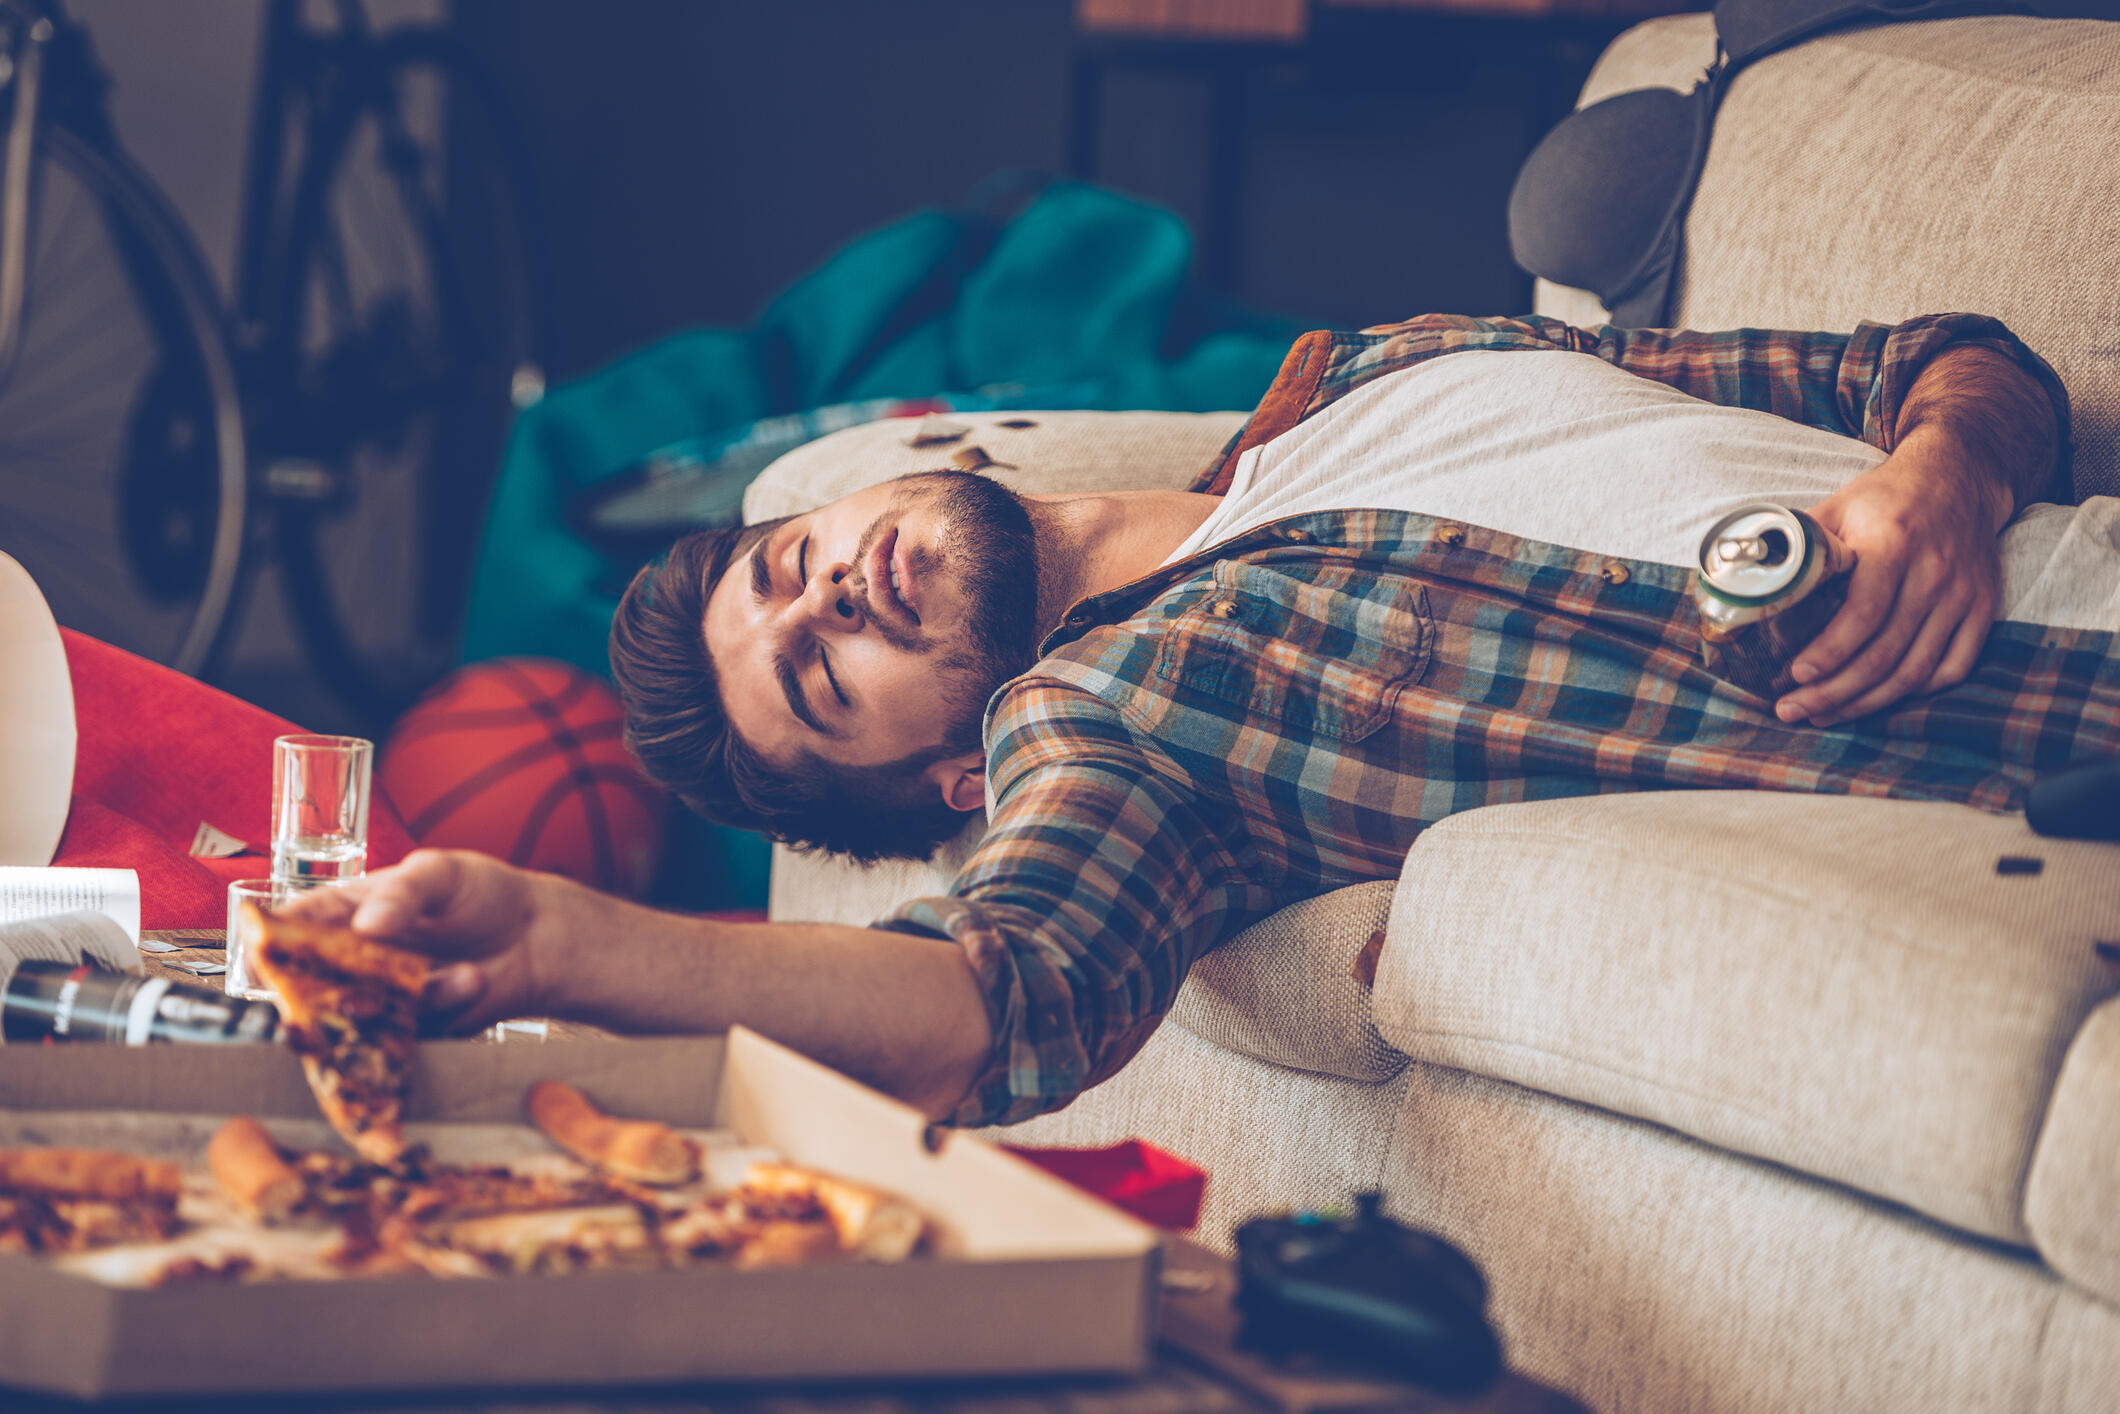 Young handsome man passed out on sofa with pizza slice and beer can in his hand in messy room after party